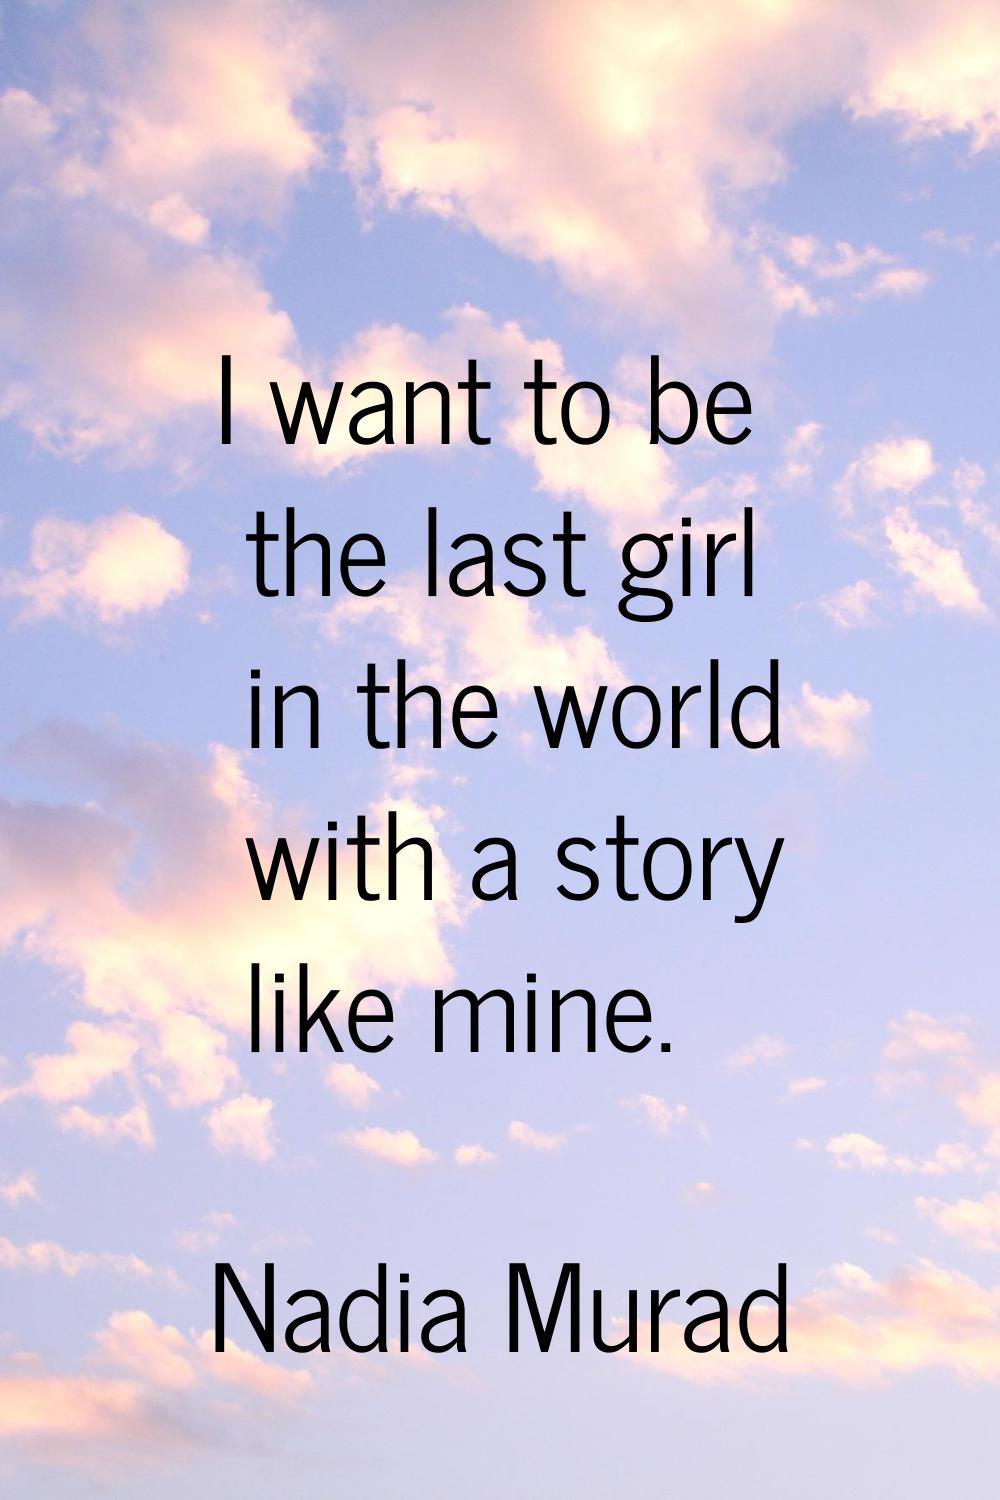 I want to be the last girl in the world with a story like mine.